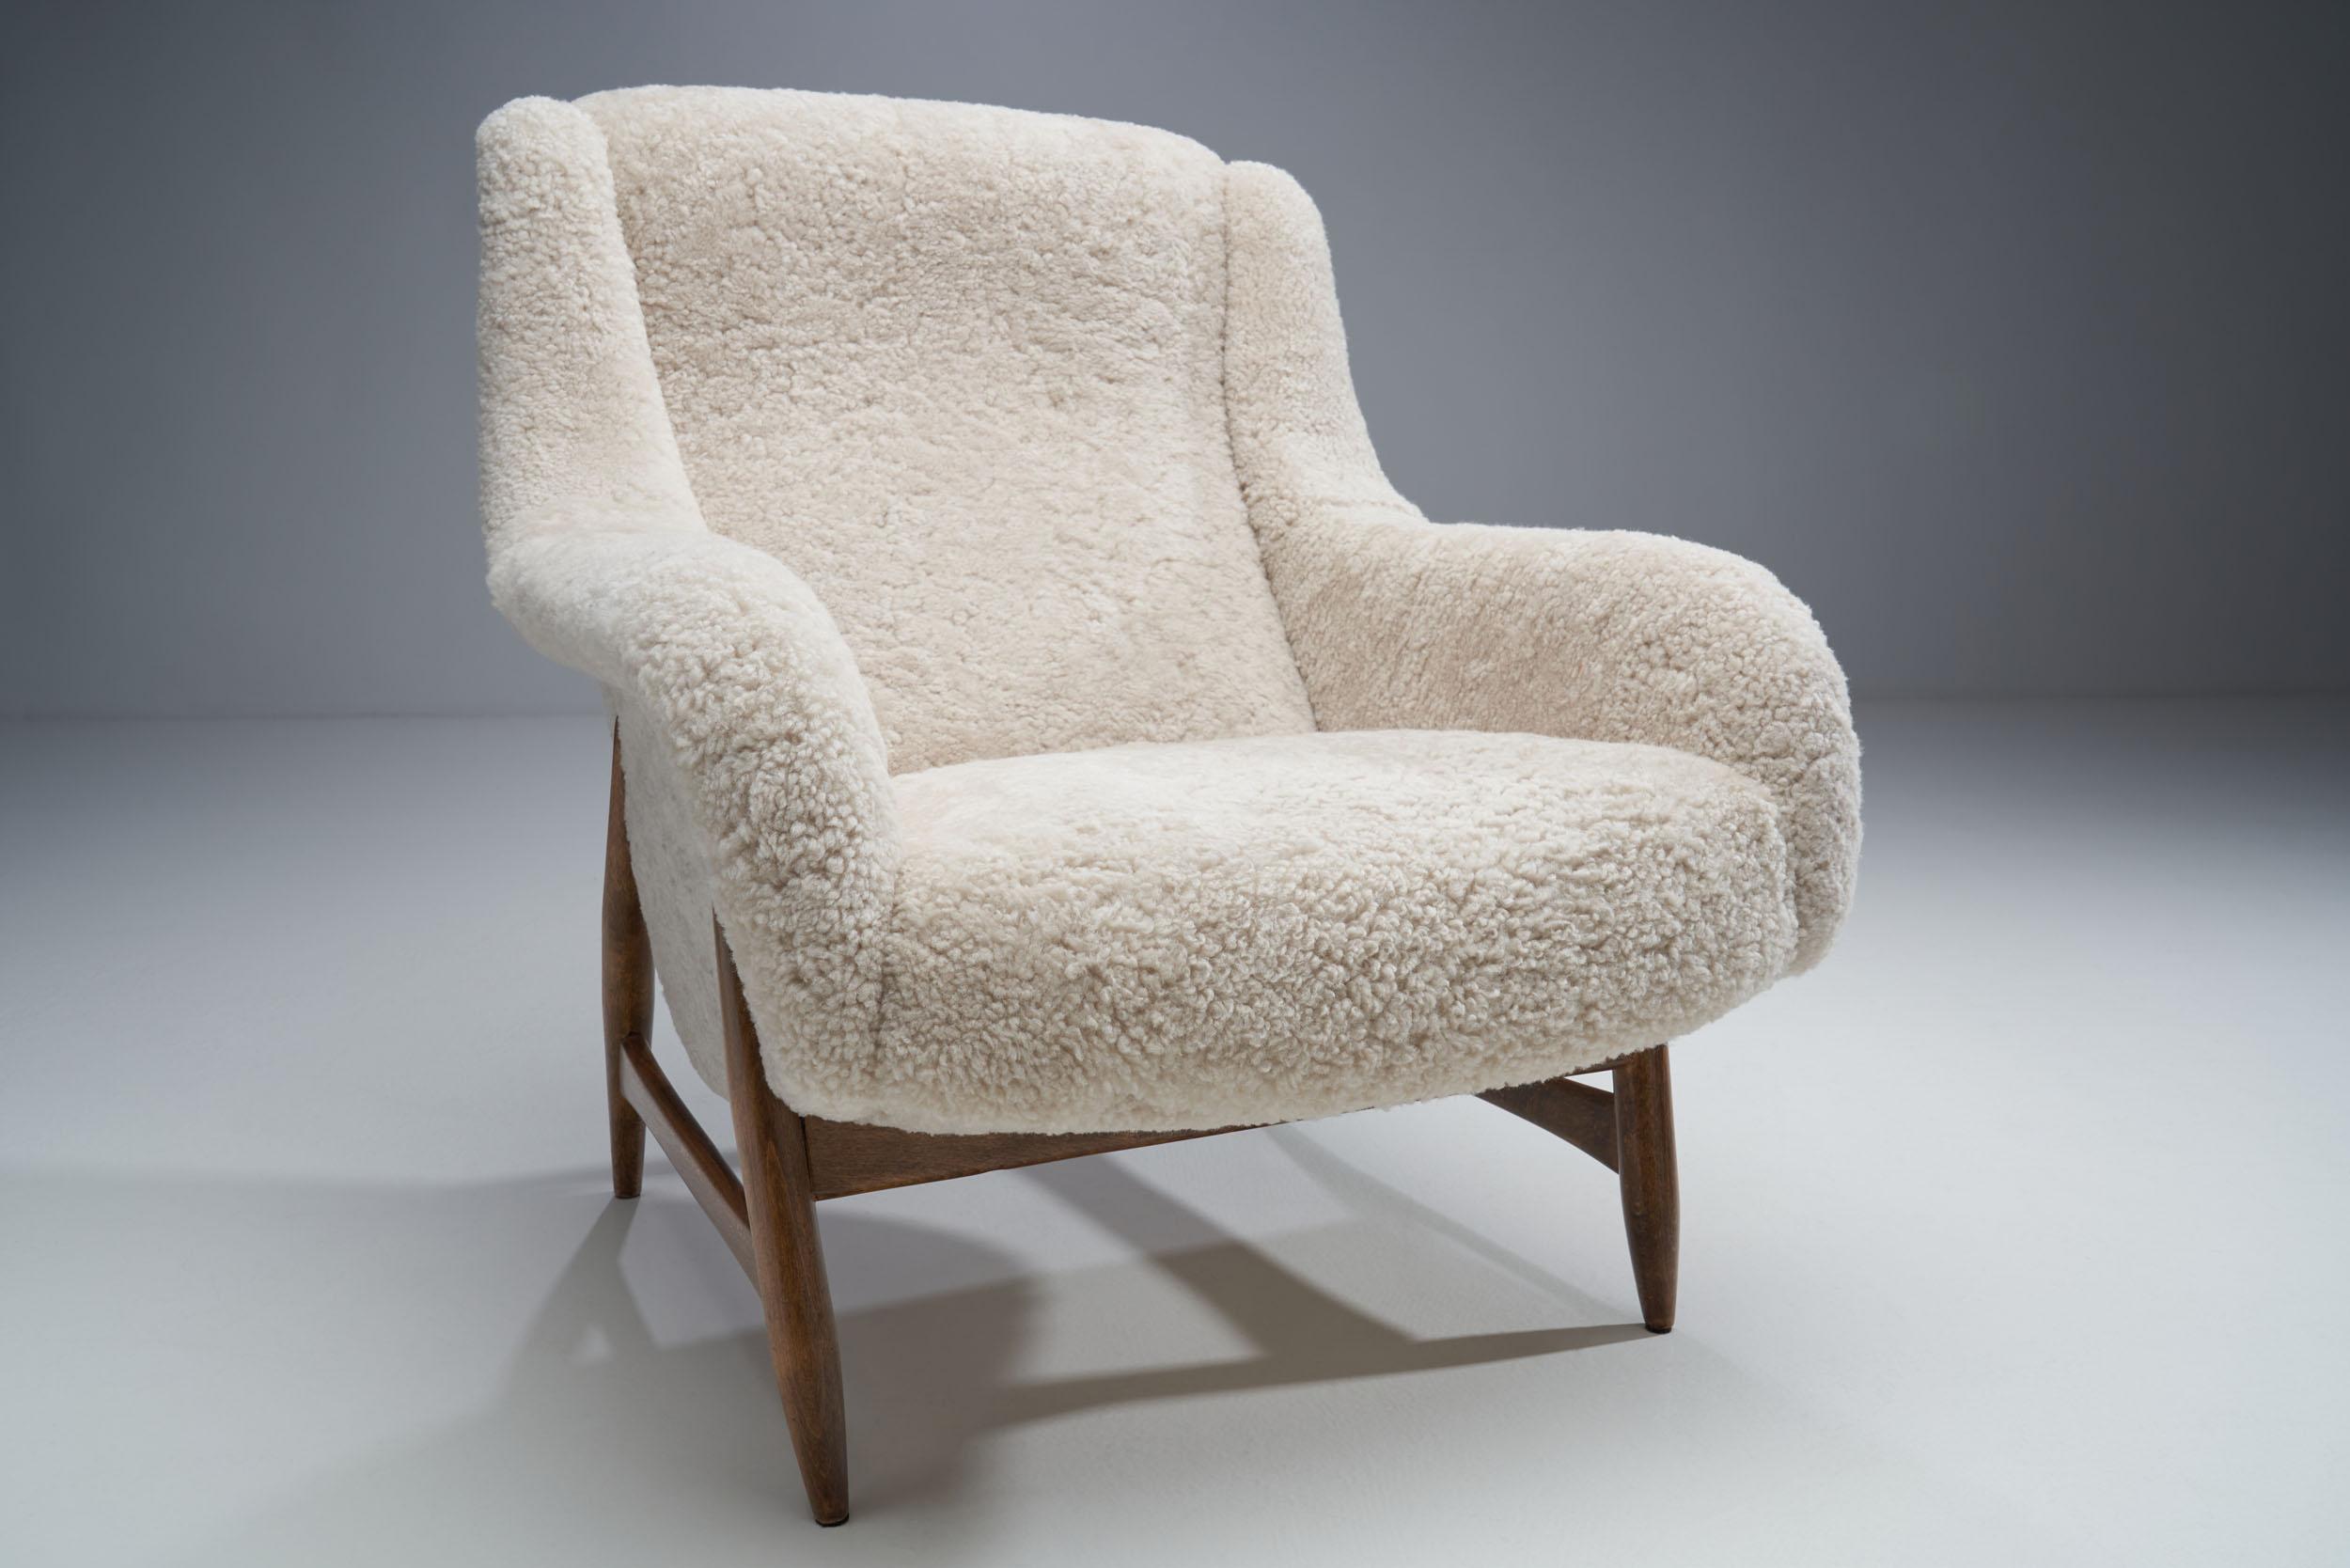 Sheepskin Rare Lounge Chair by Bengt Ruda for Artifort, The Netherlands 1960s For Sale